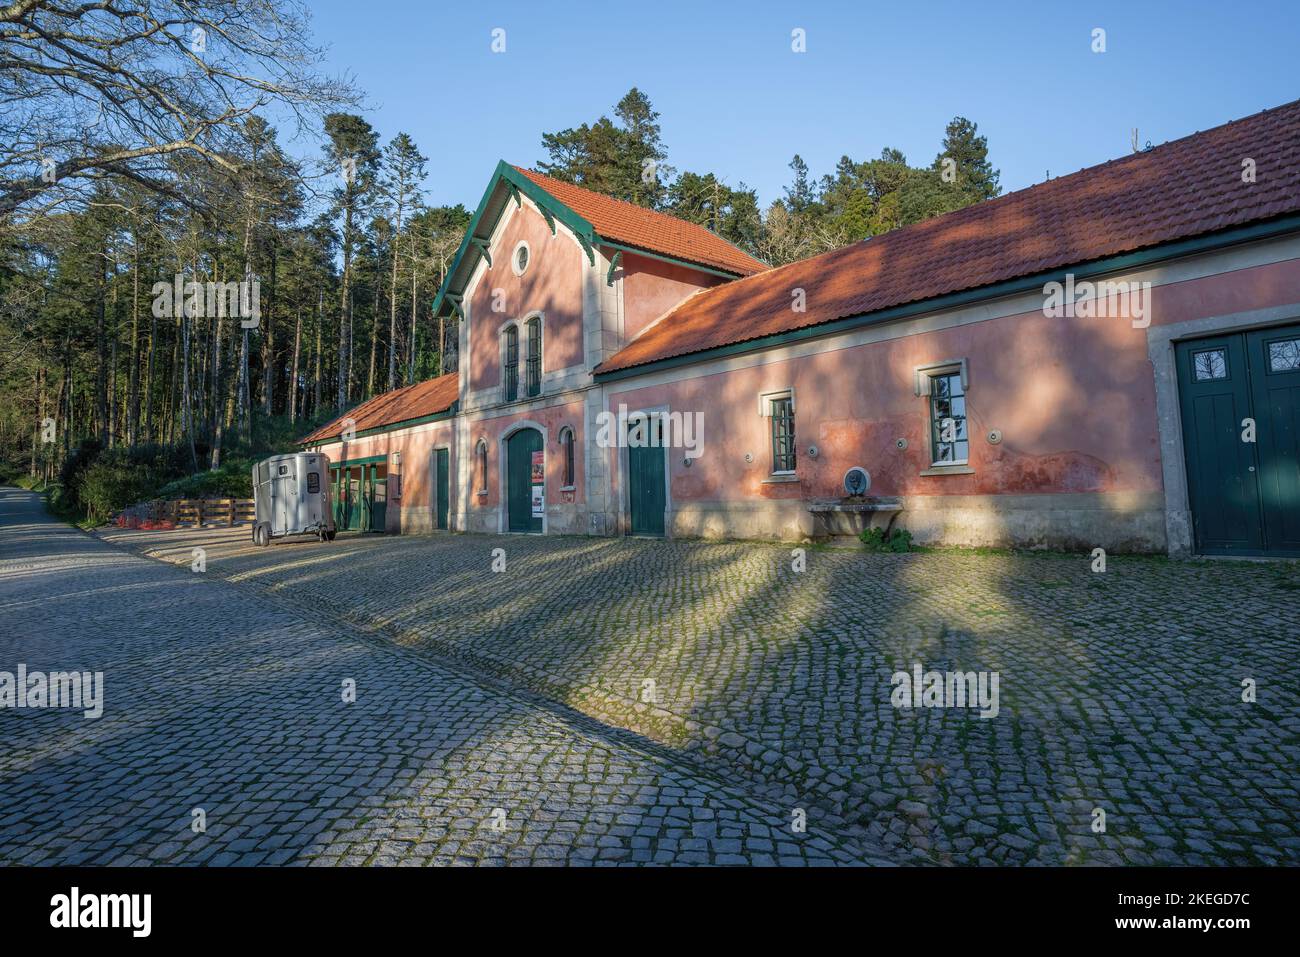 Stables of Pena Farm at Pena Palace Park - Sintra, Portugal Stock Photo